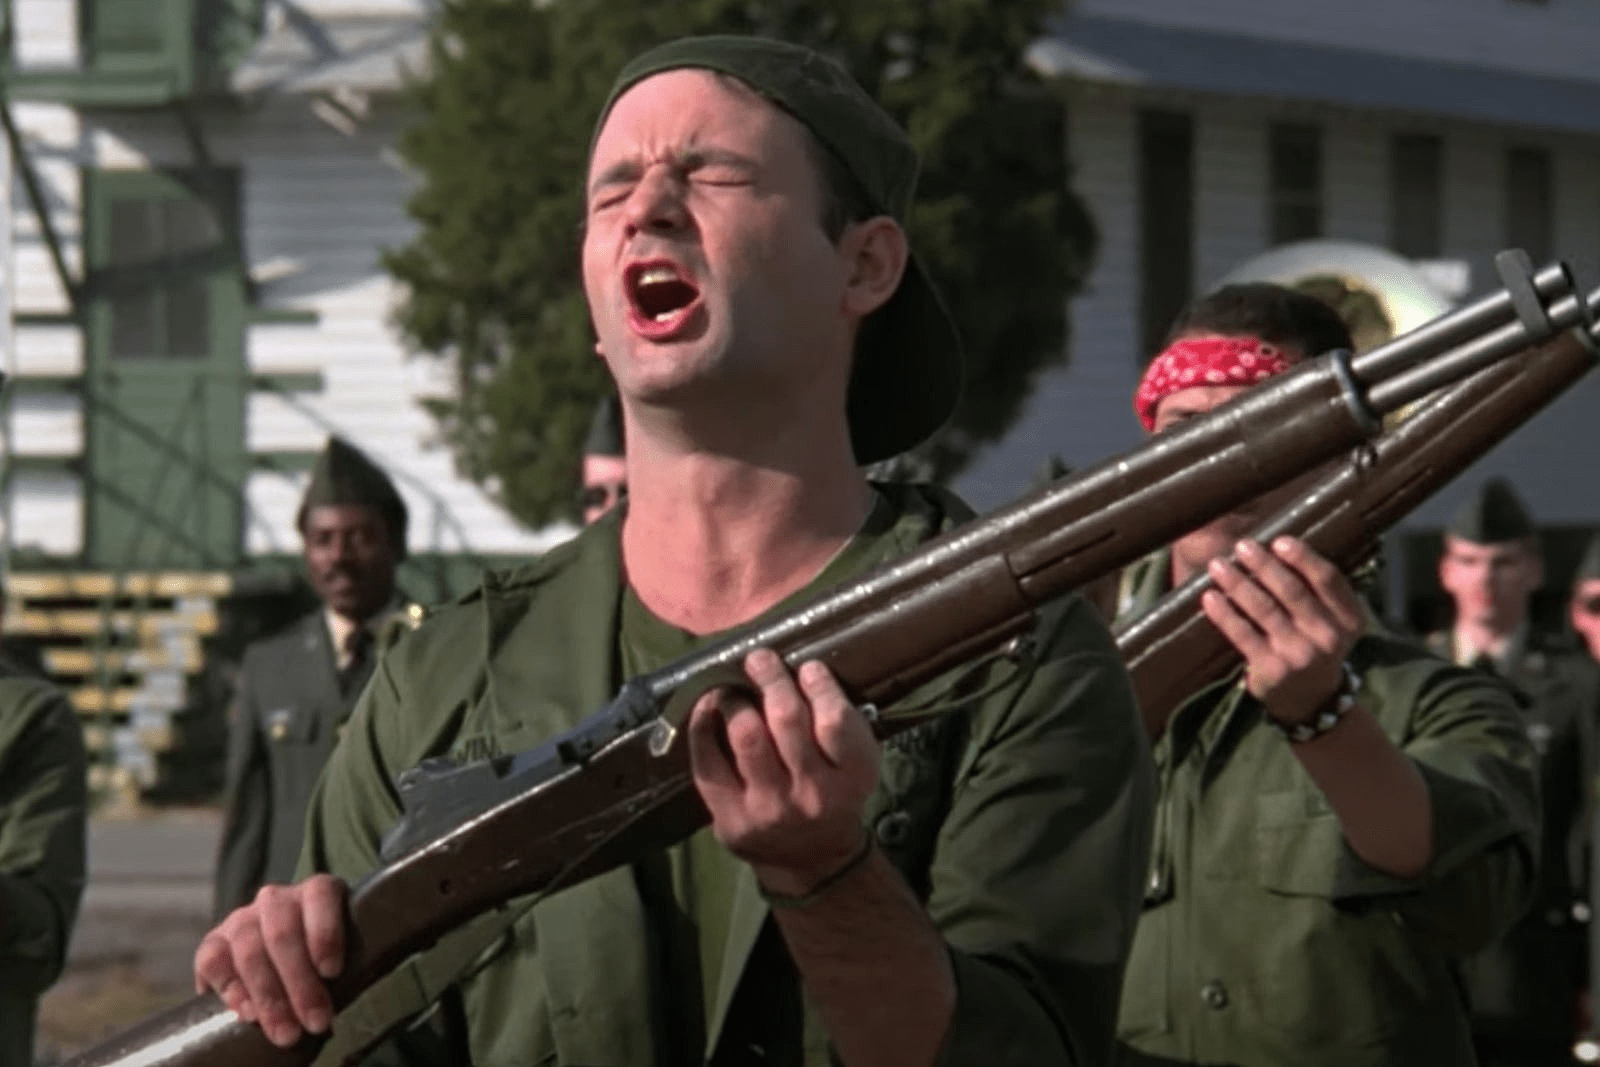 10 Greatest Bill Murray Movies, Ranked From Great to Legendary